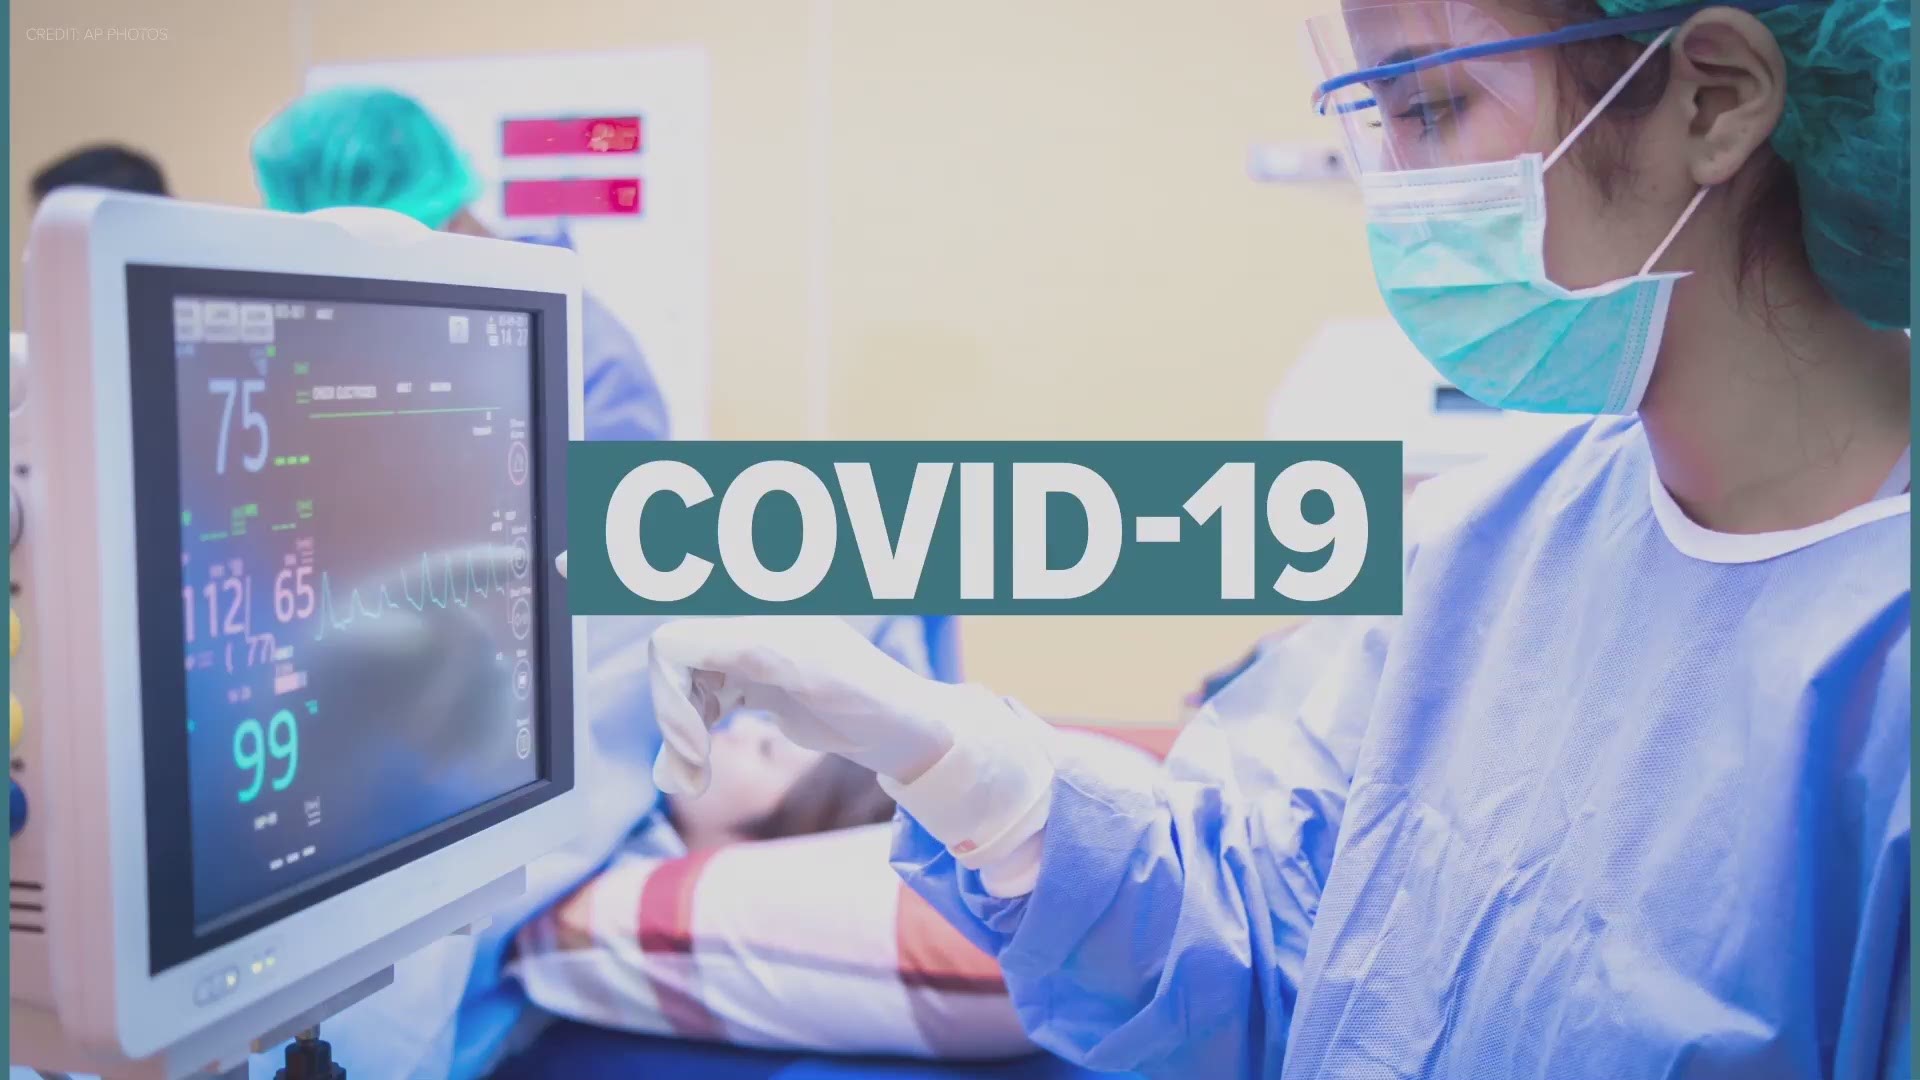 The number of coronavirus cases in Arizona has reached 15,315 as of Thursday, with 763 coronavirus-related deaths. Here's the latest COVID-19 update.